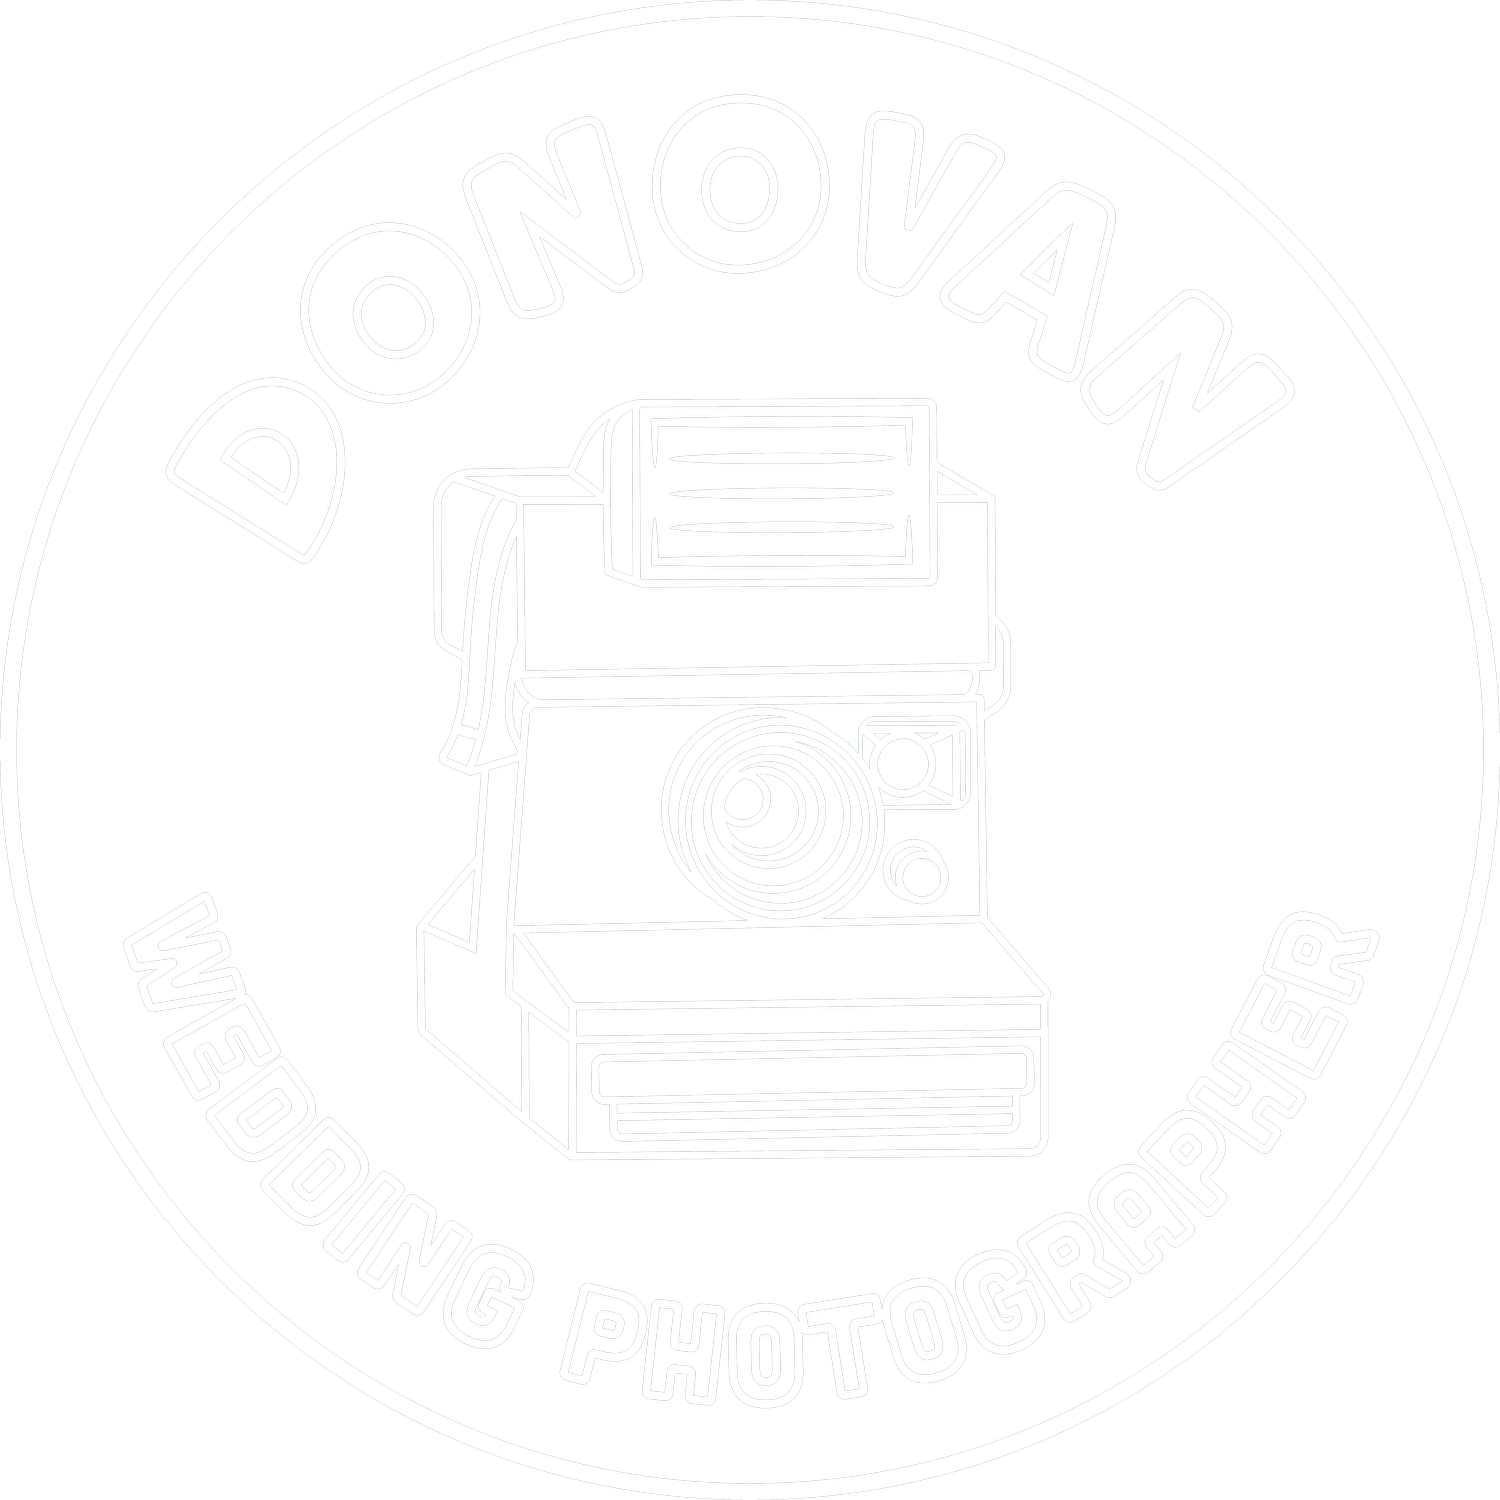 Donovansview Photography